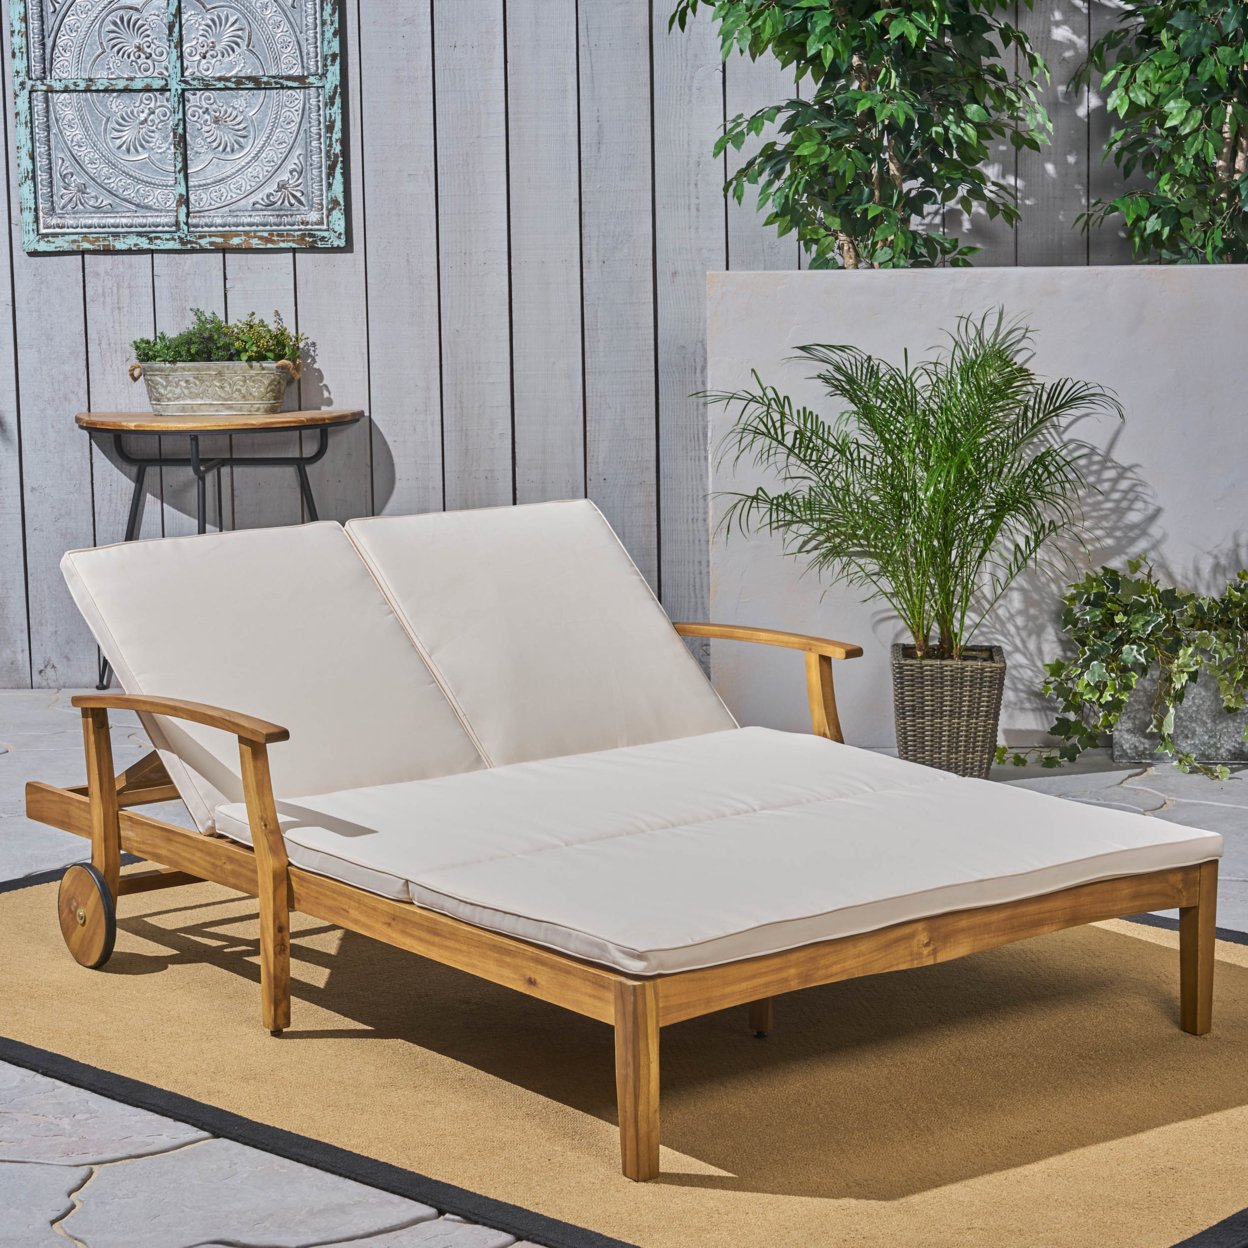 Samantha Double Chaise Lounge For Yard And Patio, Acacia Wood Frame - Cream